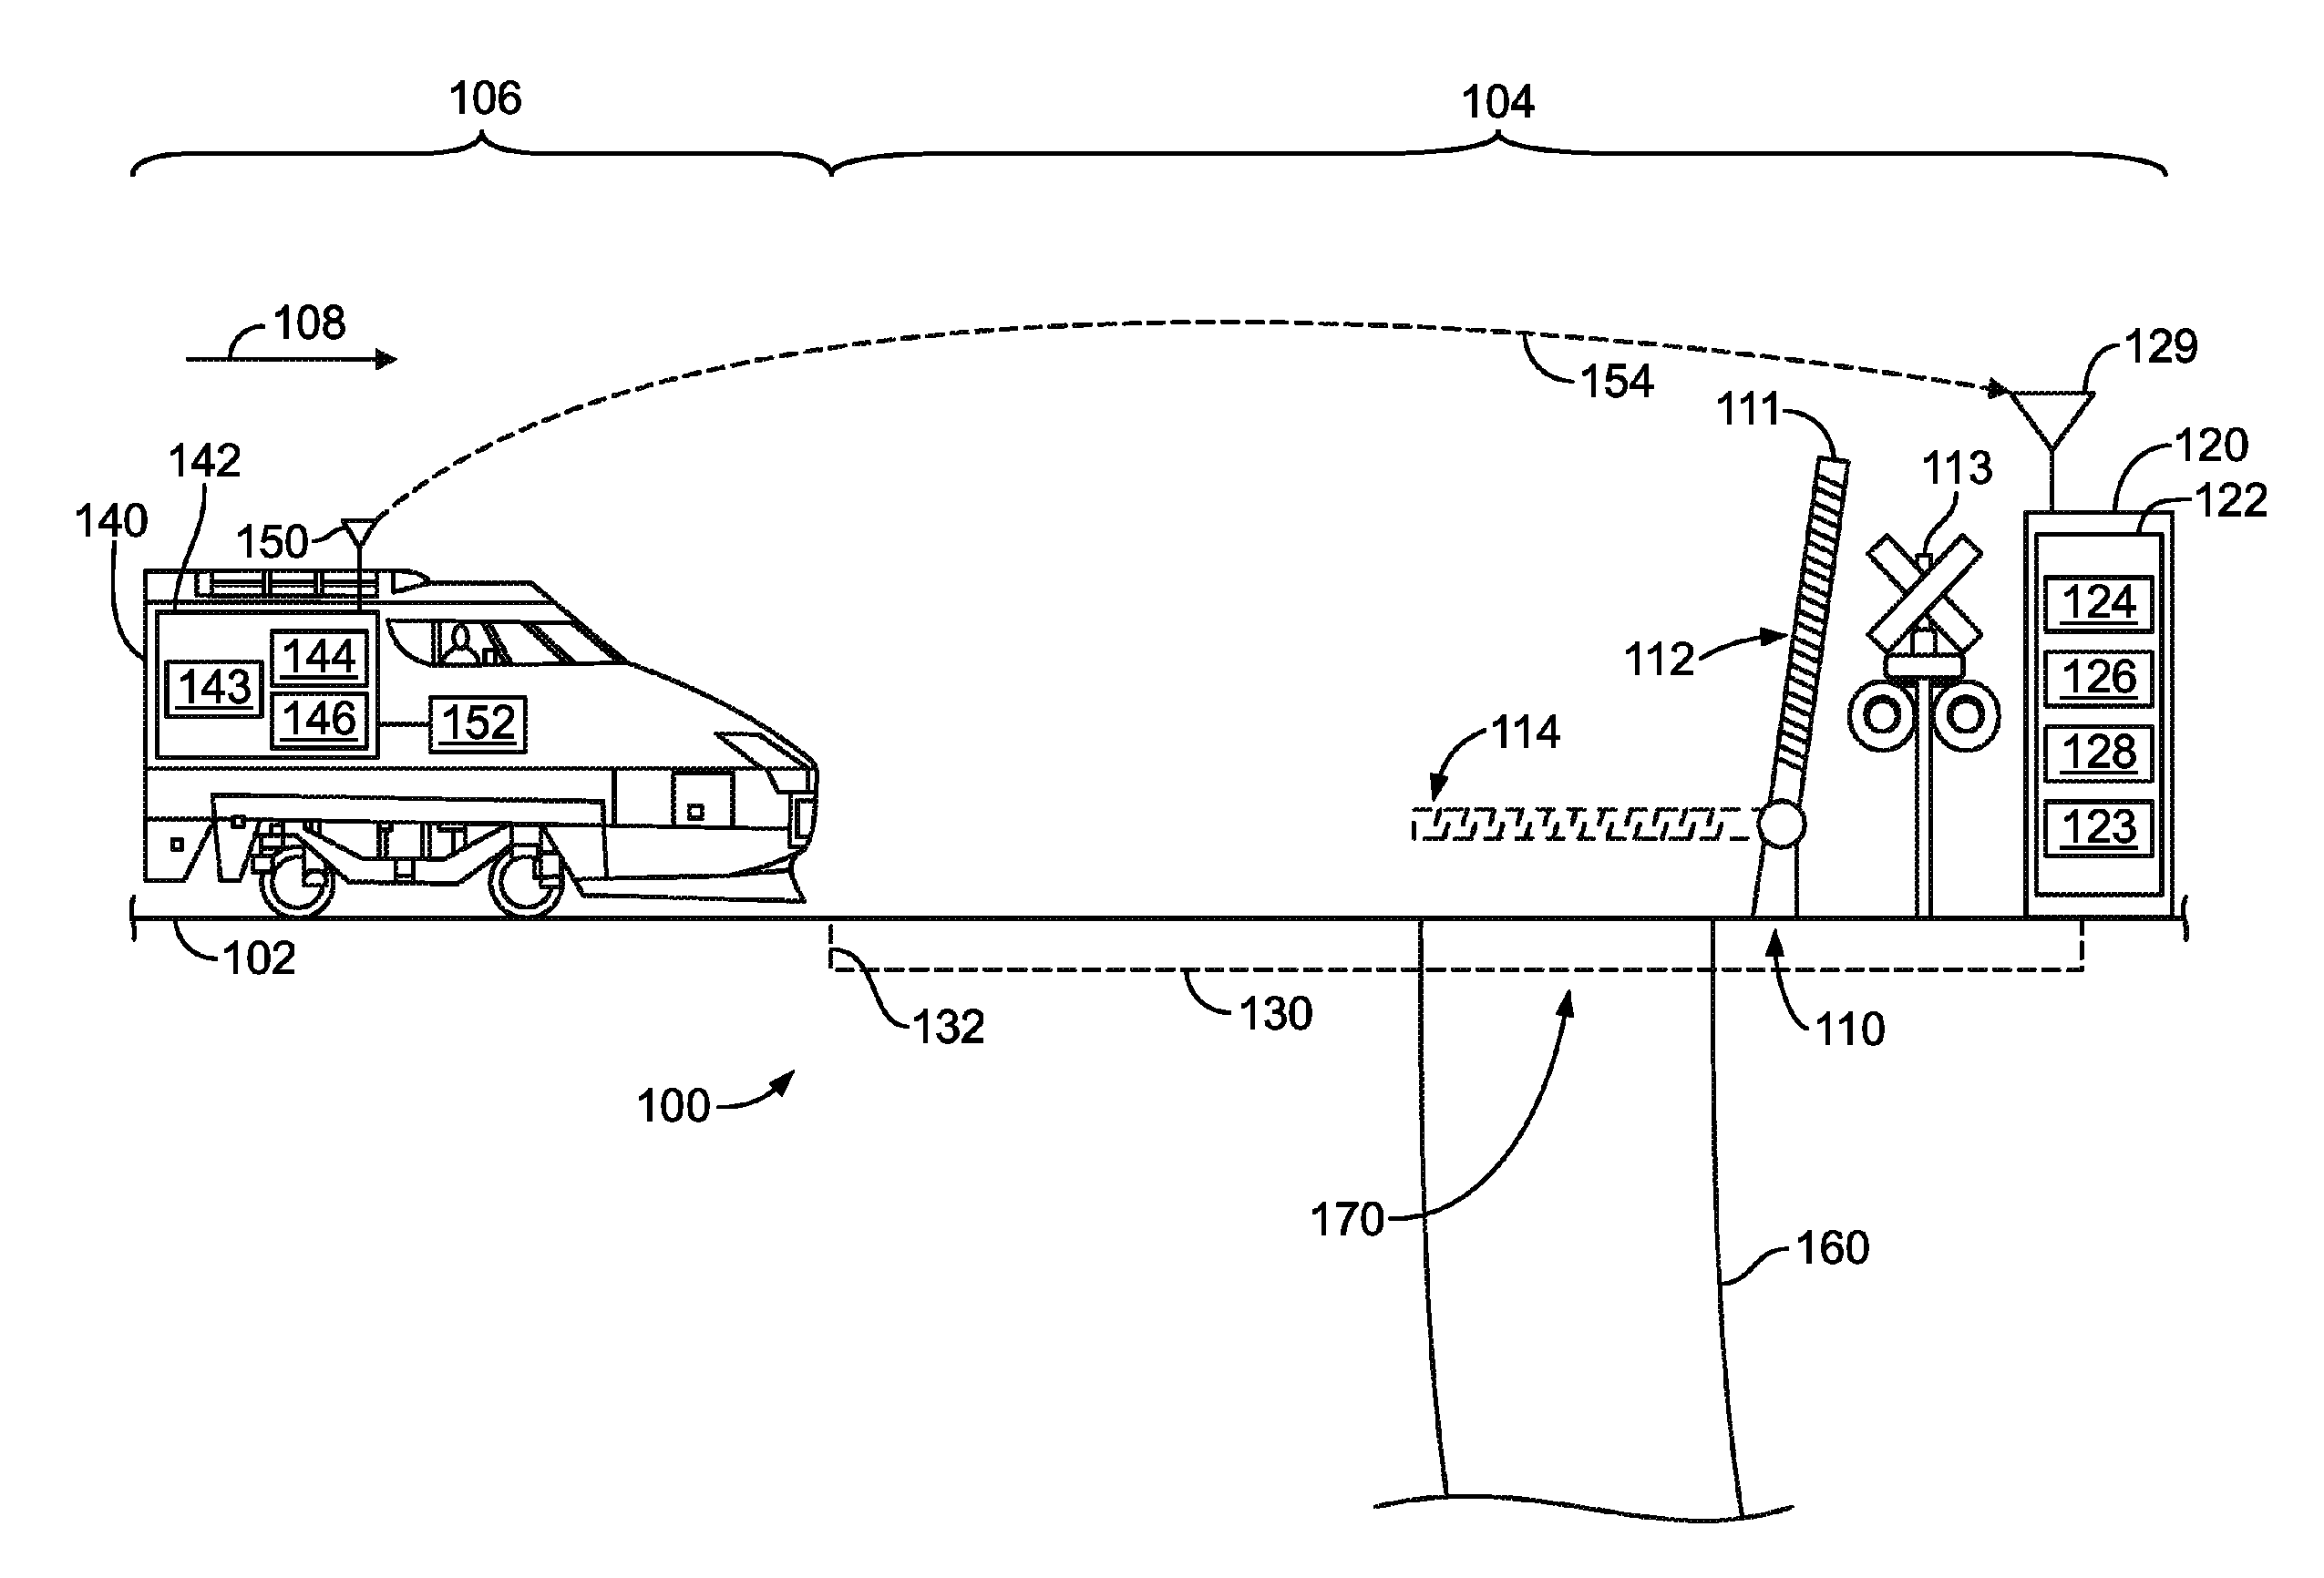 Systems and methods for providing constant warning time at crossings